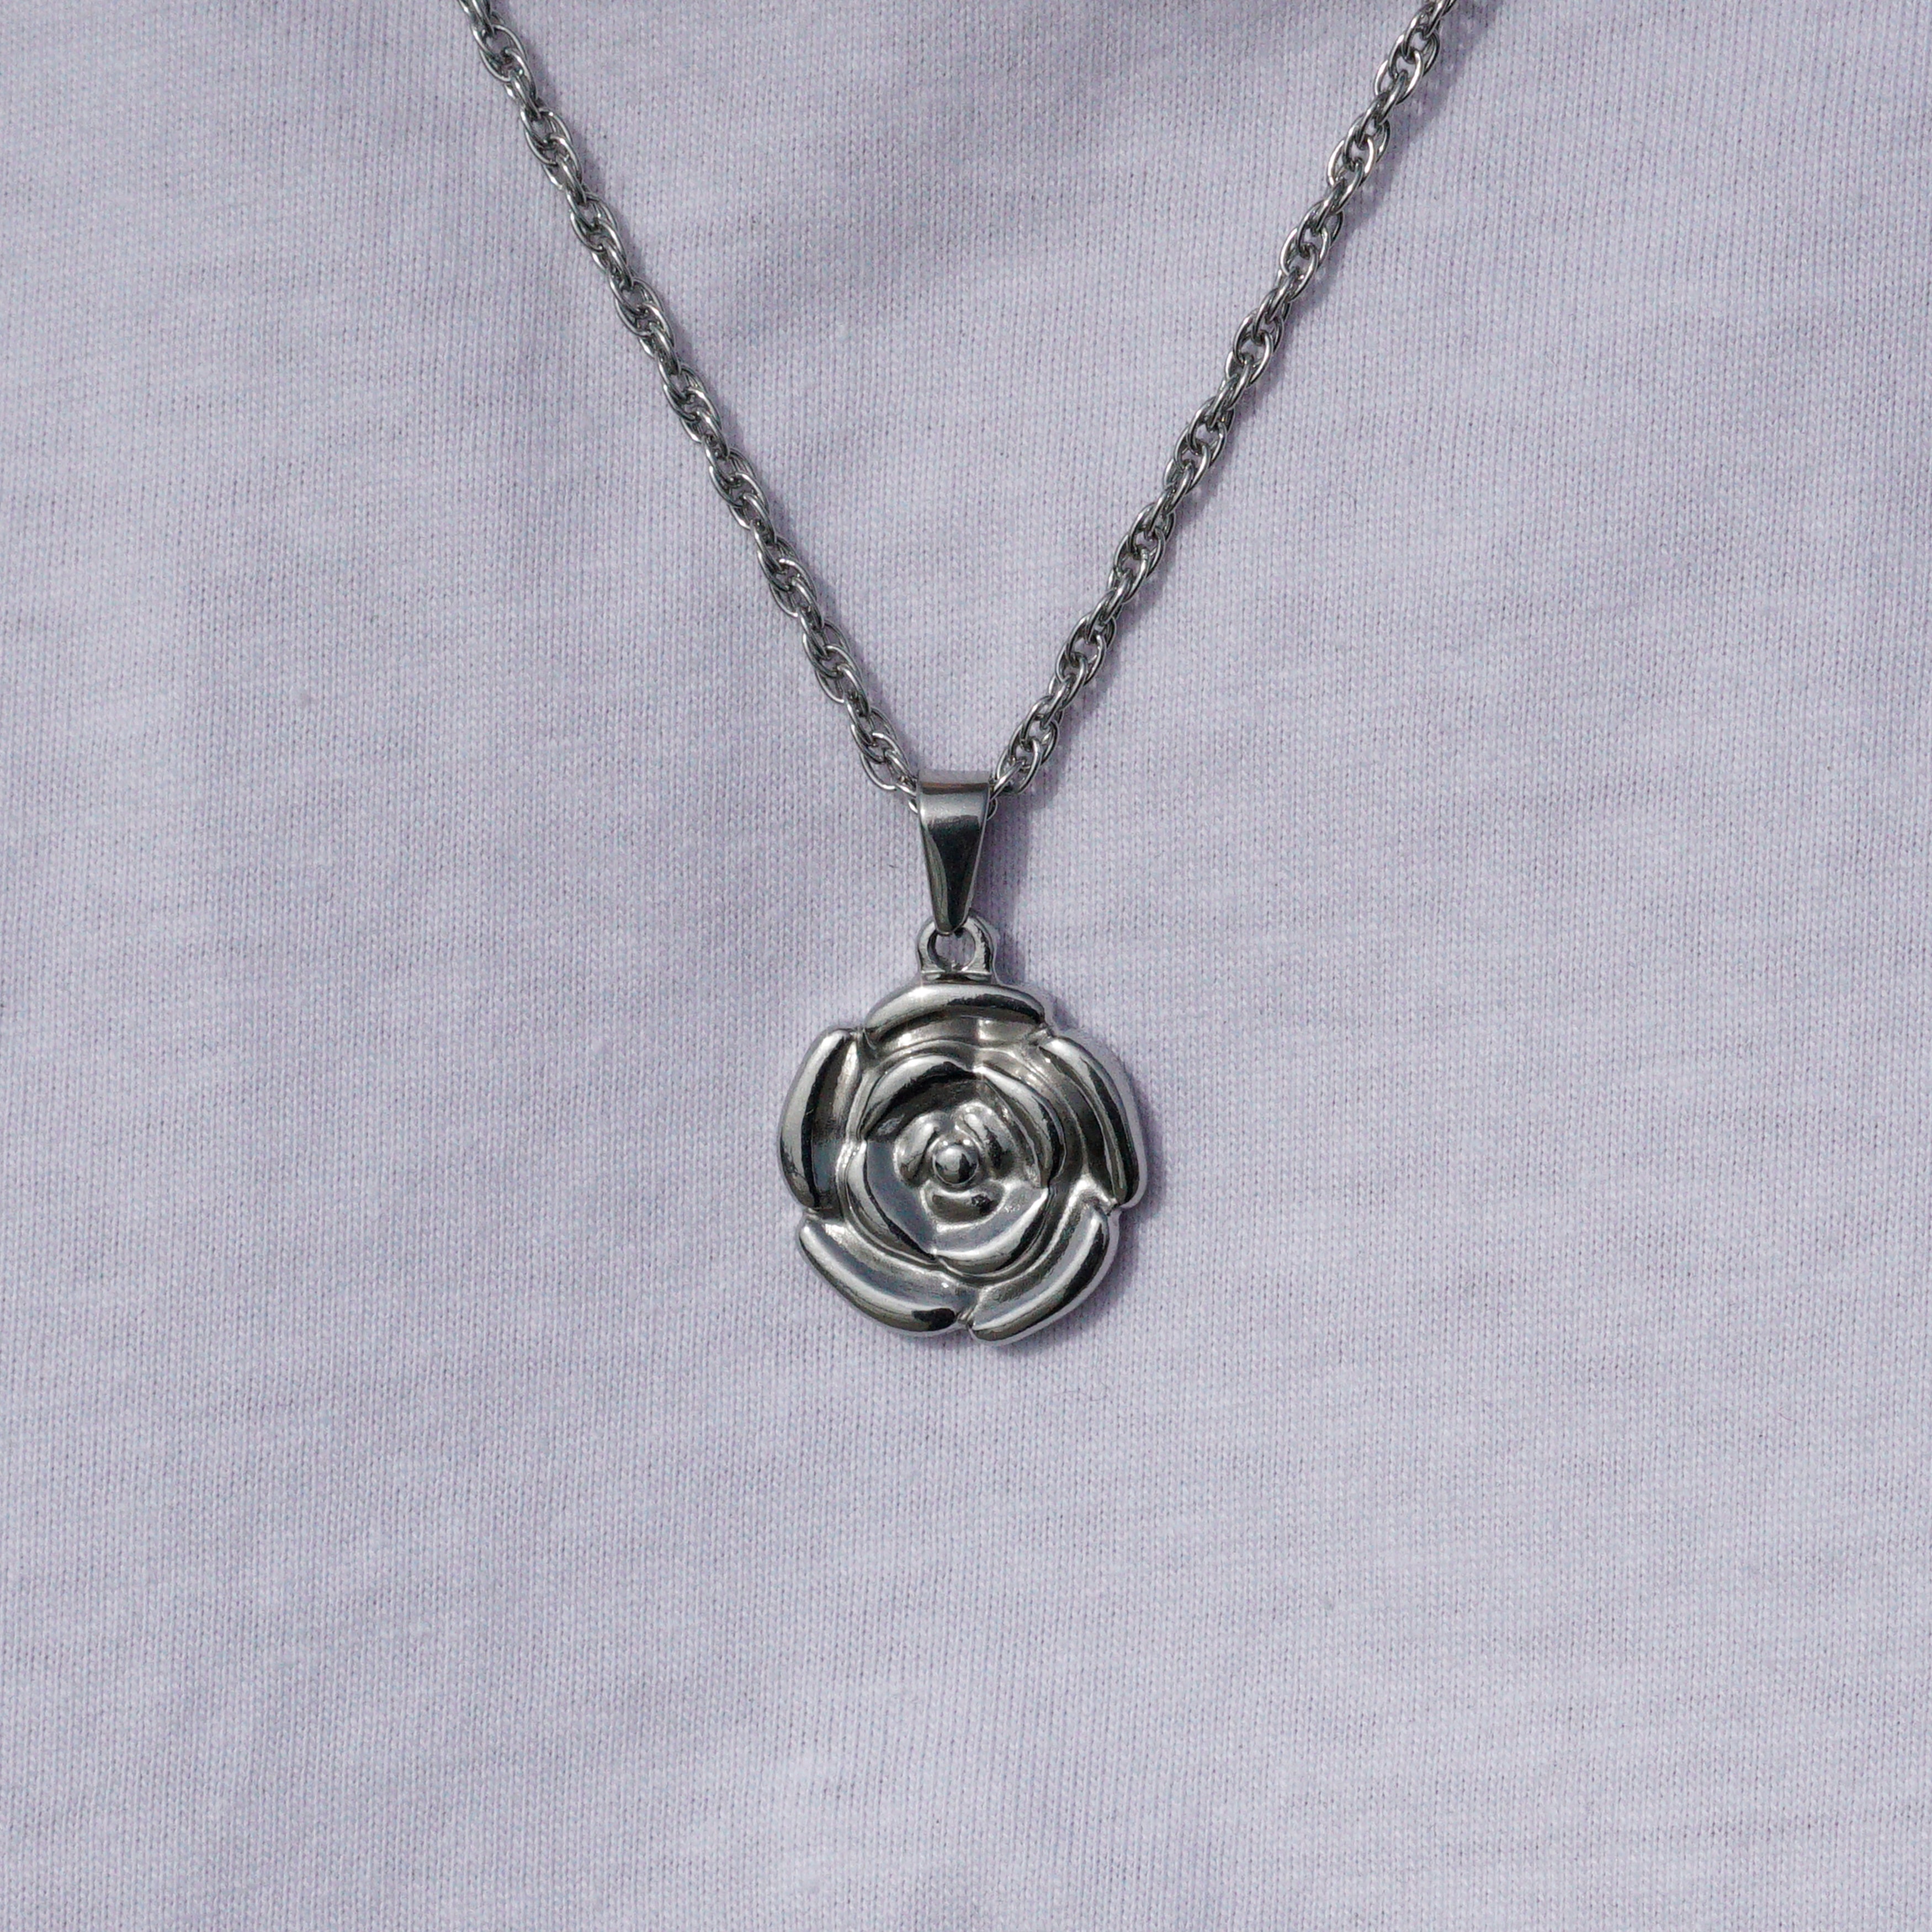 ROSEHEAD NECKLACE - SILVER TONE